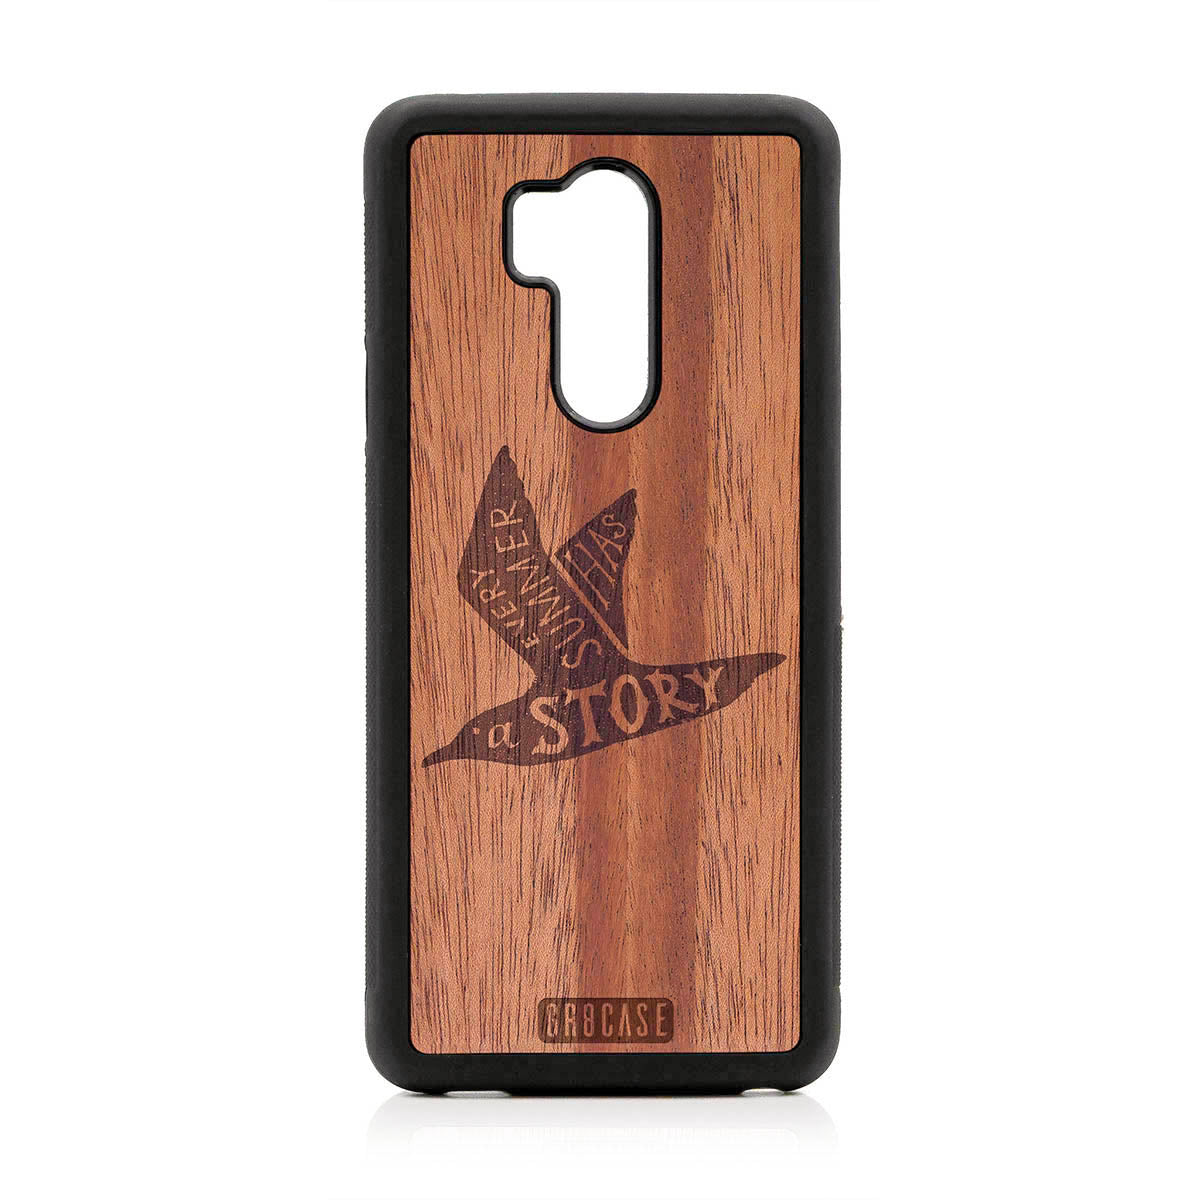 Every Summer Has A Story (Seagull) Design Wood Case For LG G7 ThinQ